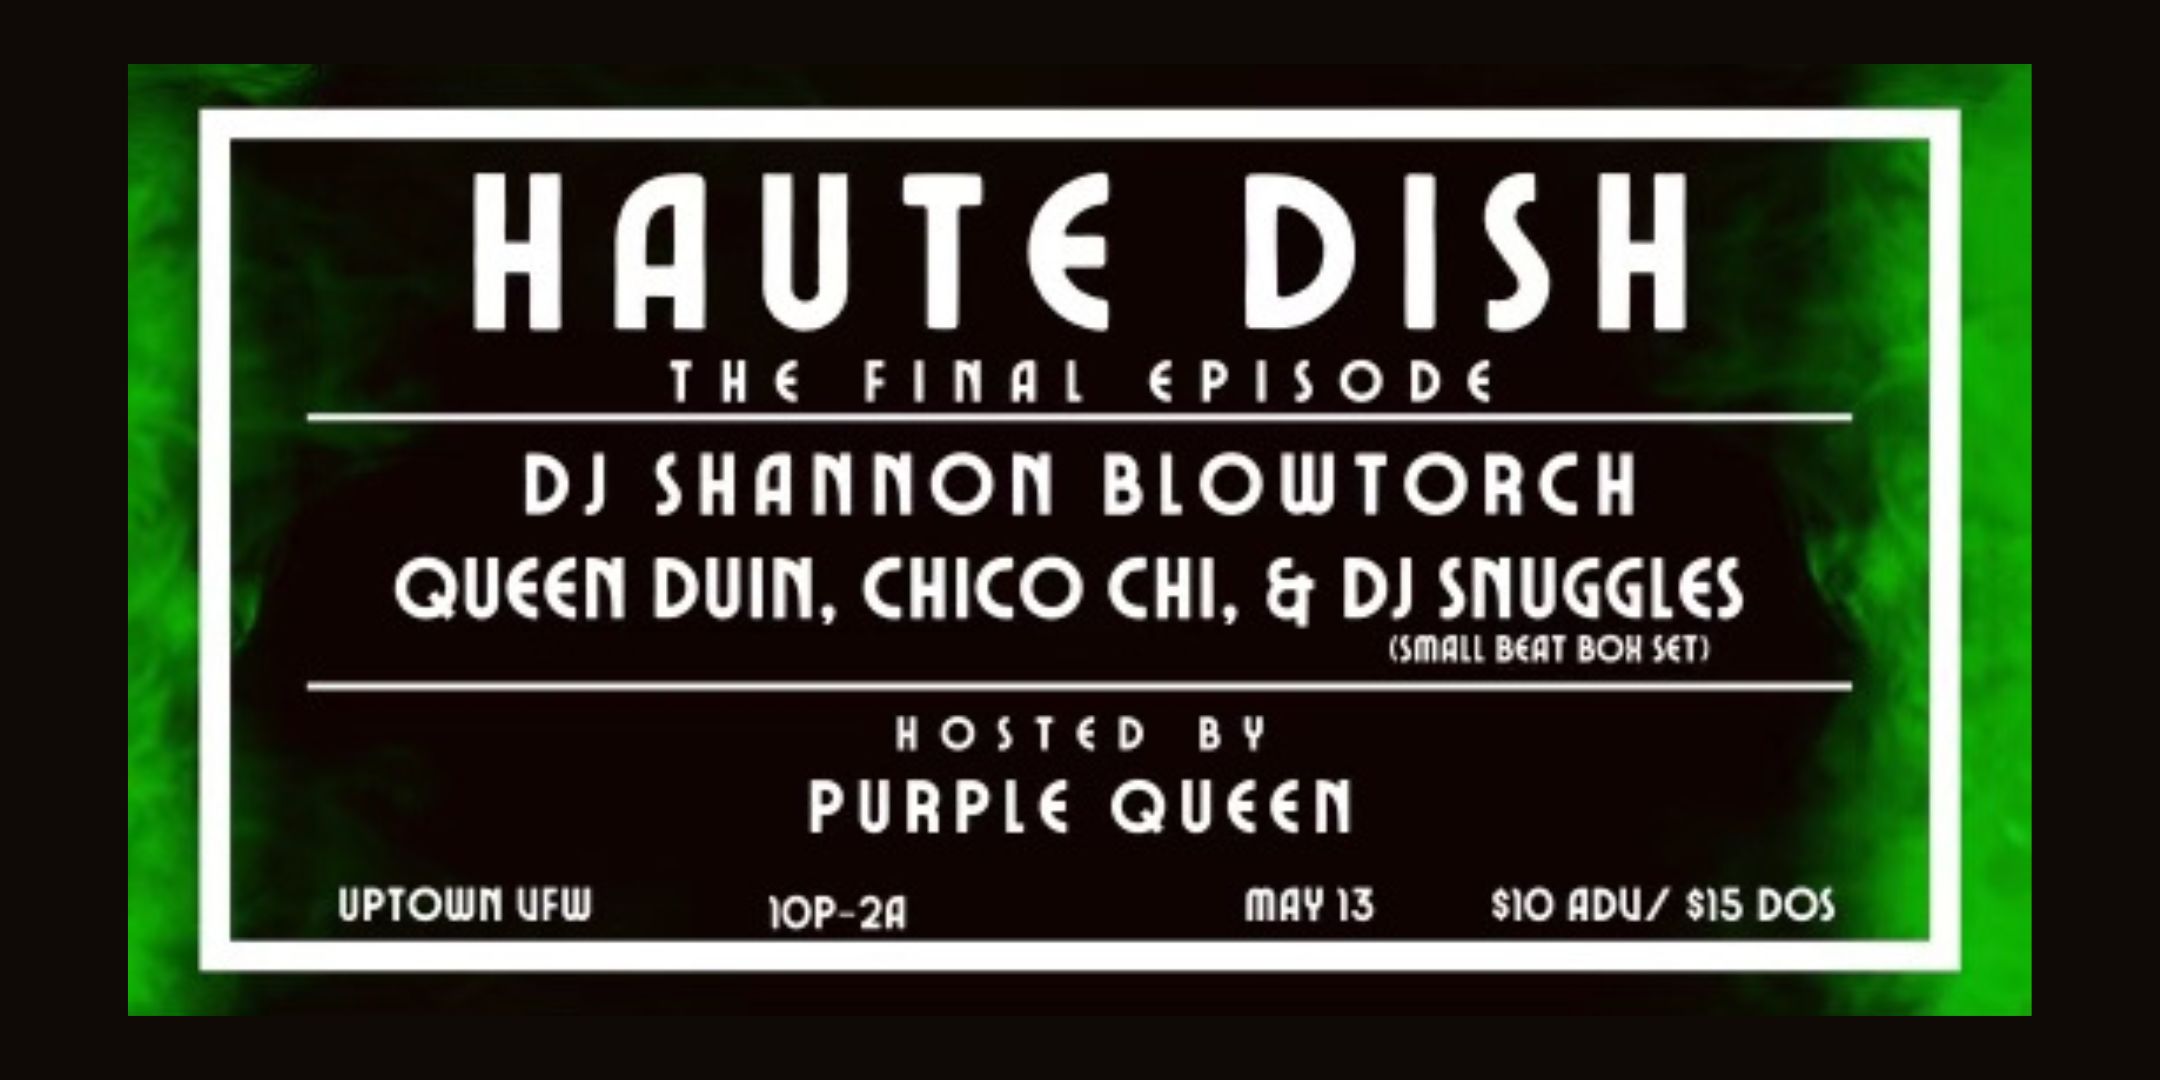 Haute Dish - The Final Episode DJ Shannon Blowtorch Queen Duin Chico Chi DJ Snuggles (Small Beat Box Set) Hosted by Purple Queen Saturday, May 13 James Ballentine "Uptown" VFW Post 246 Doors 10:00pm :: Music 10:00pm :: 21+ GA $10 ADV / $15 DOS NO REFUNDS